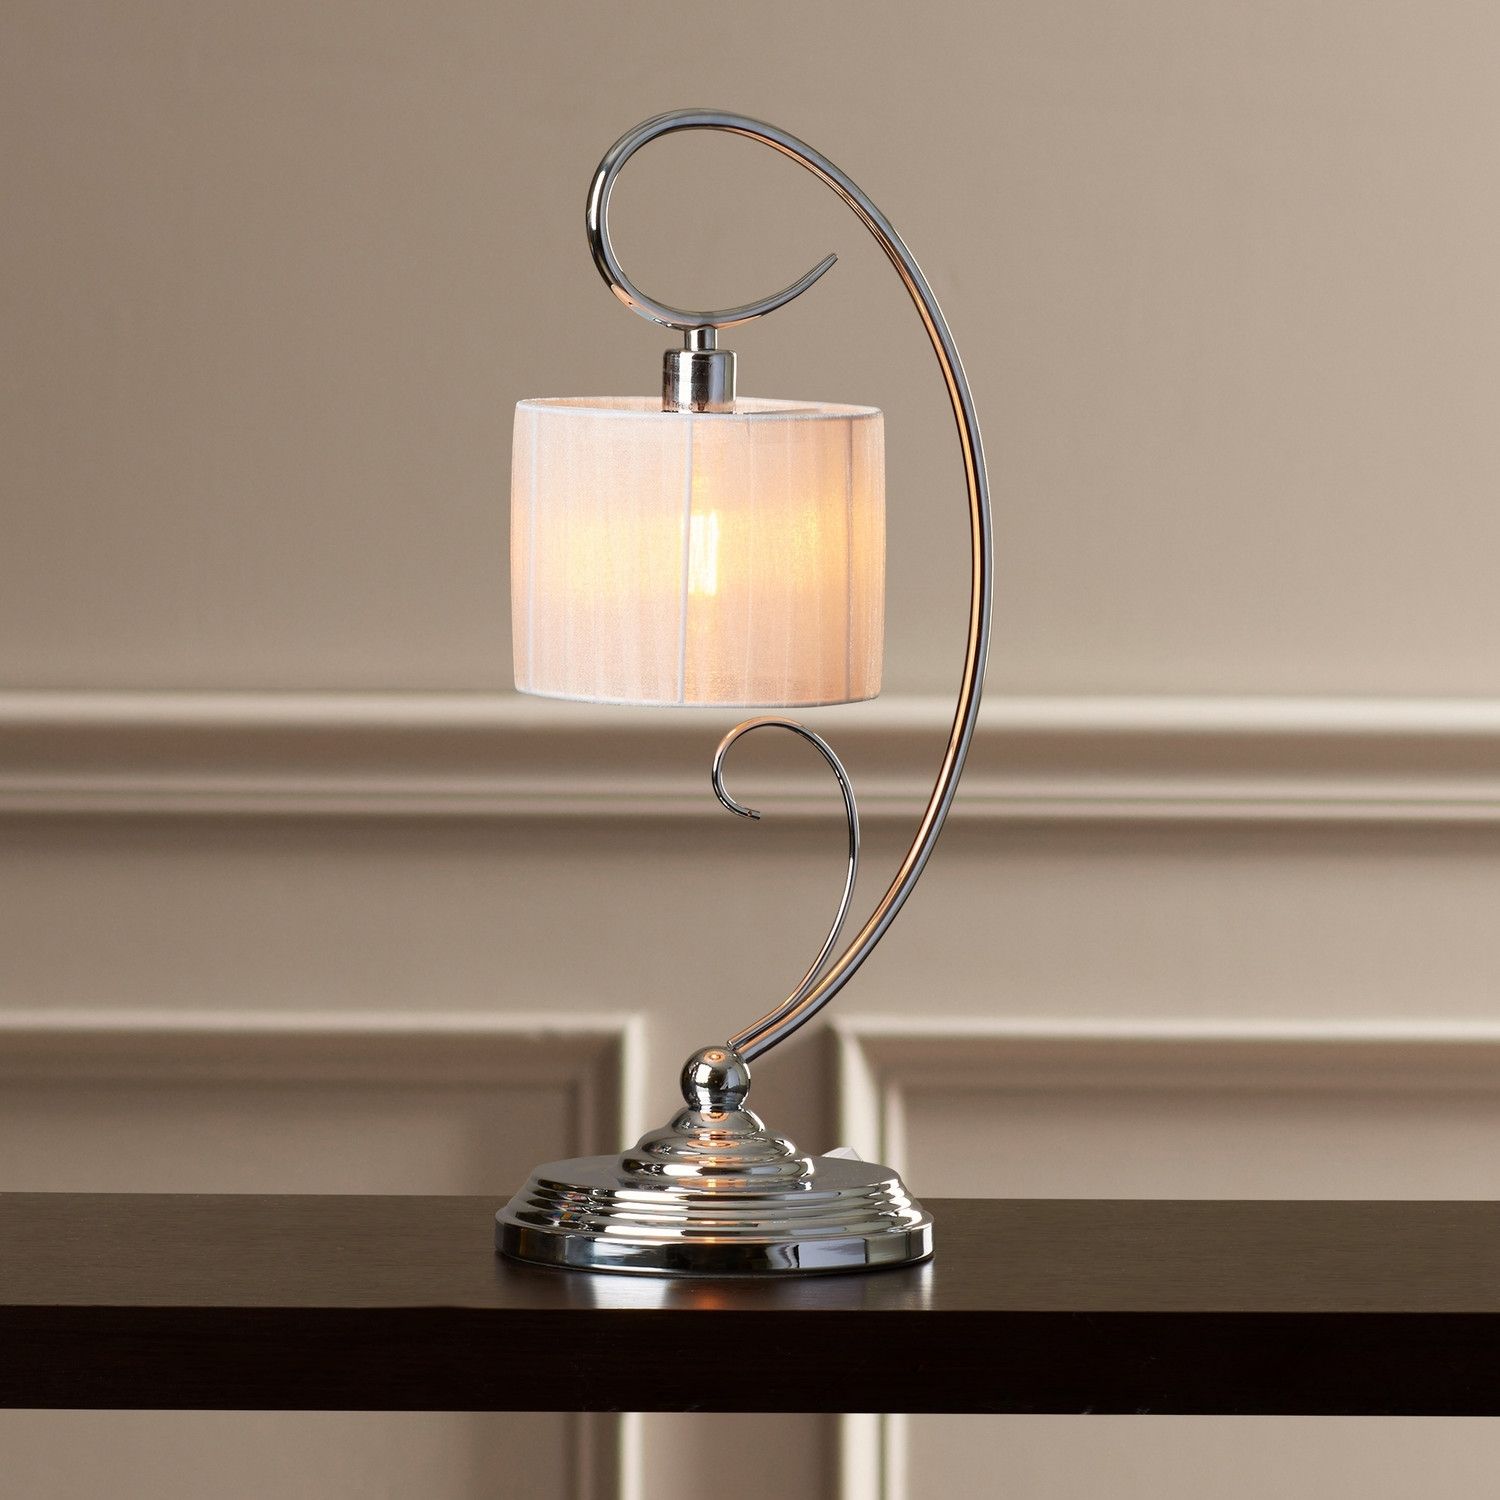 Lamp : Metal Lamp Shades For Table Lamps Inspirational New In Pertaining To Living Room Table Lamp Shades (View 6 of 15)